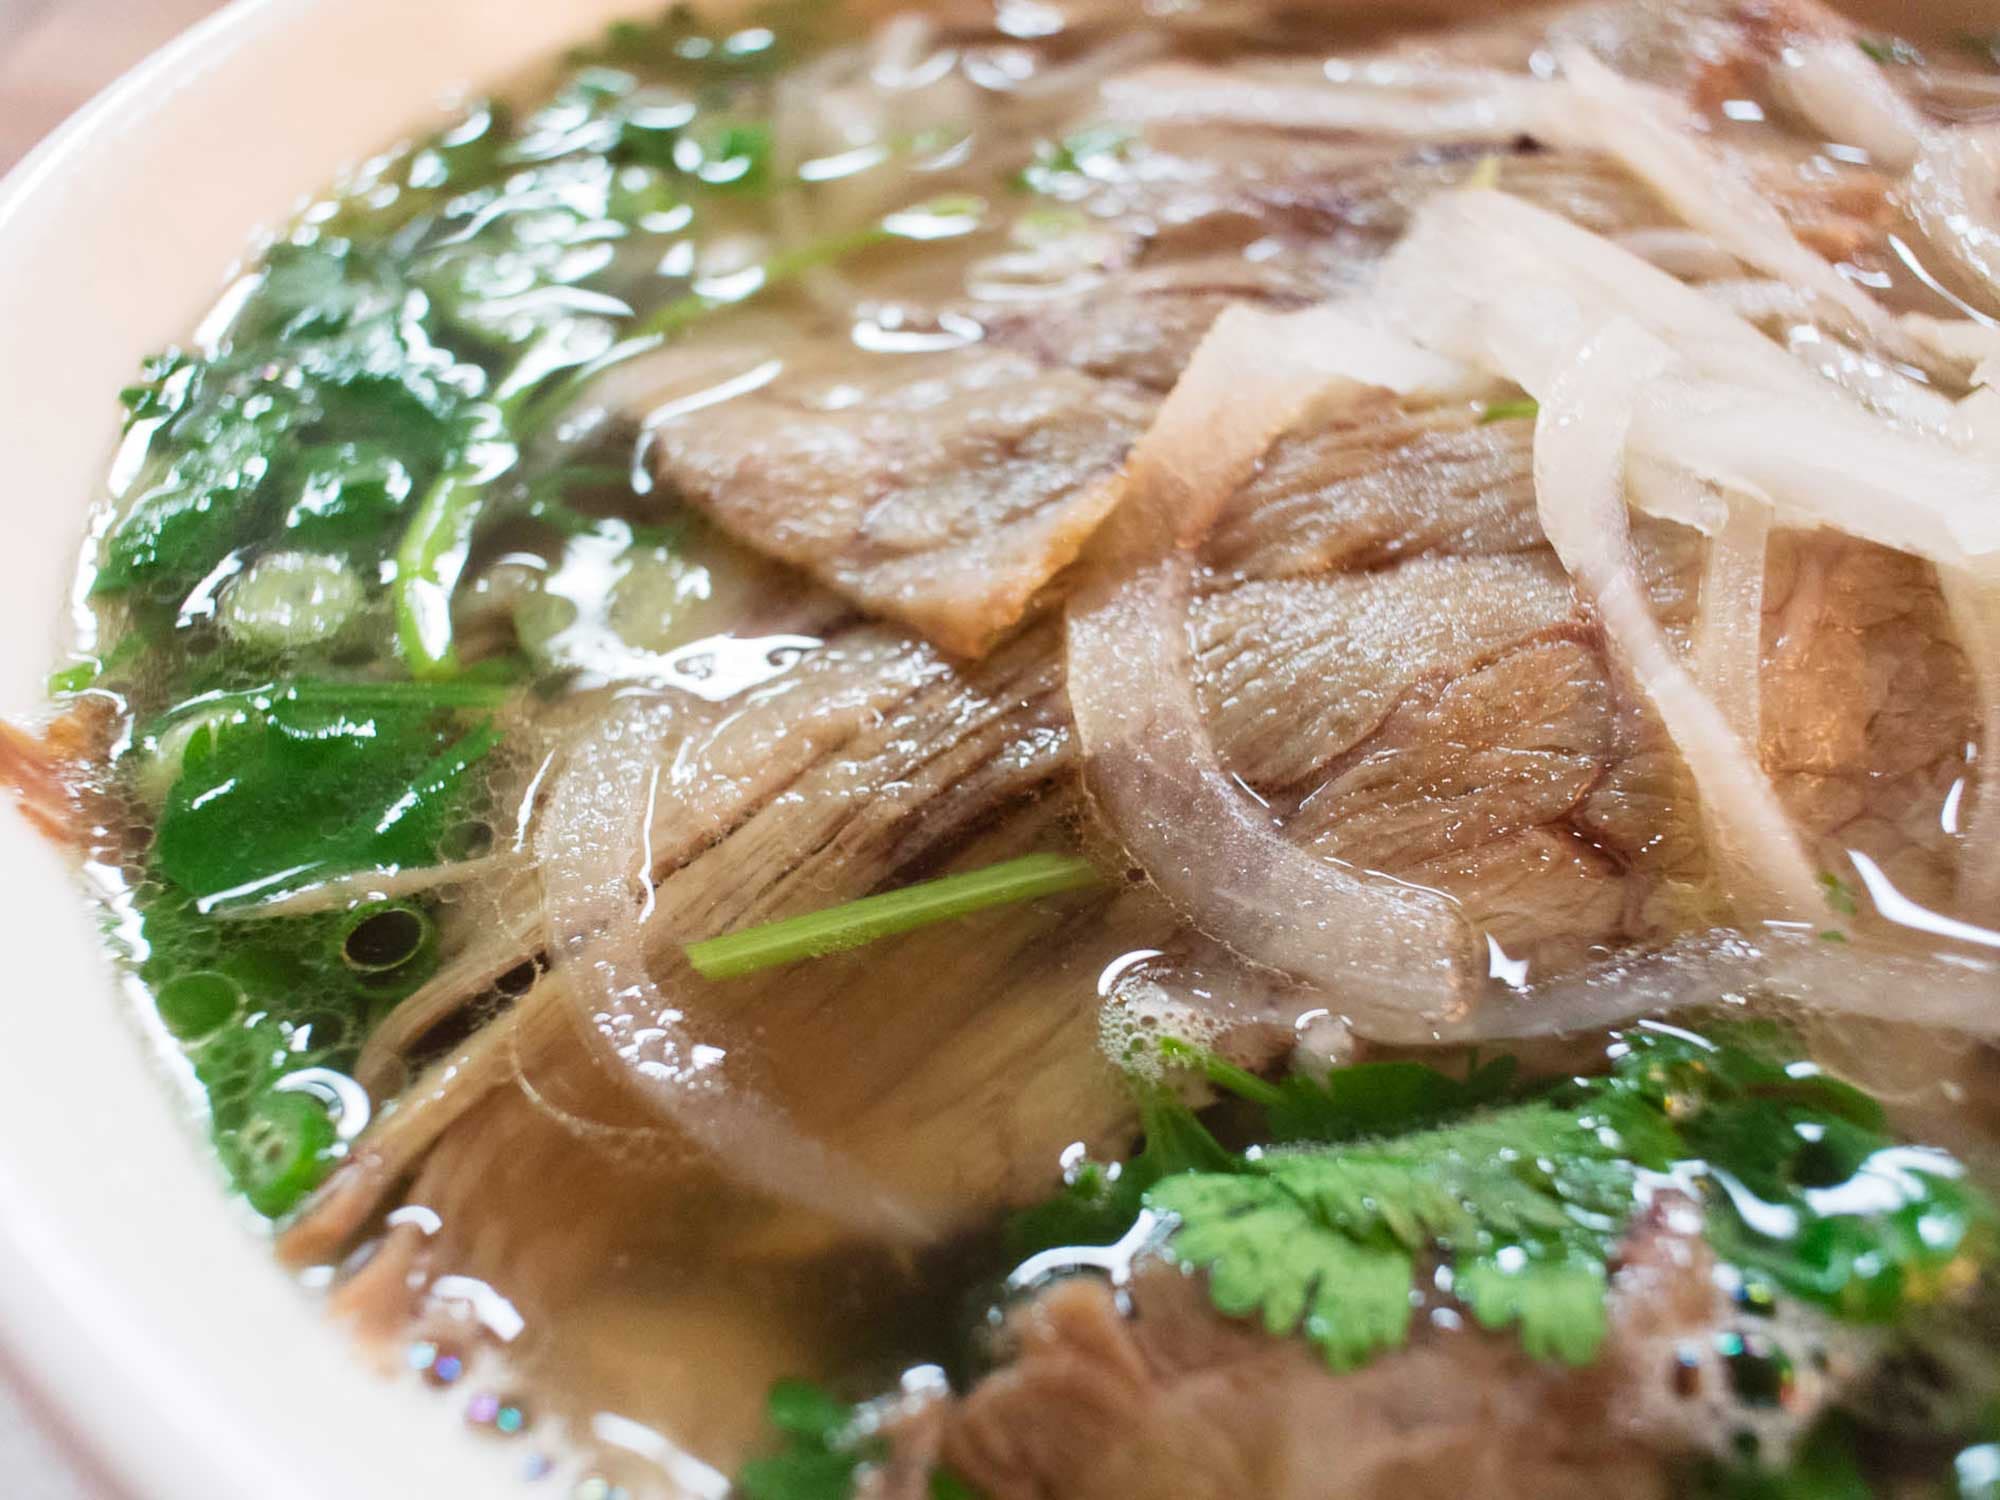 Beef phở